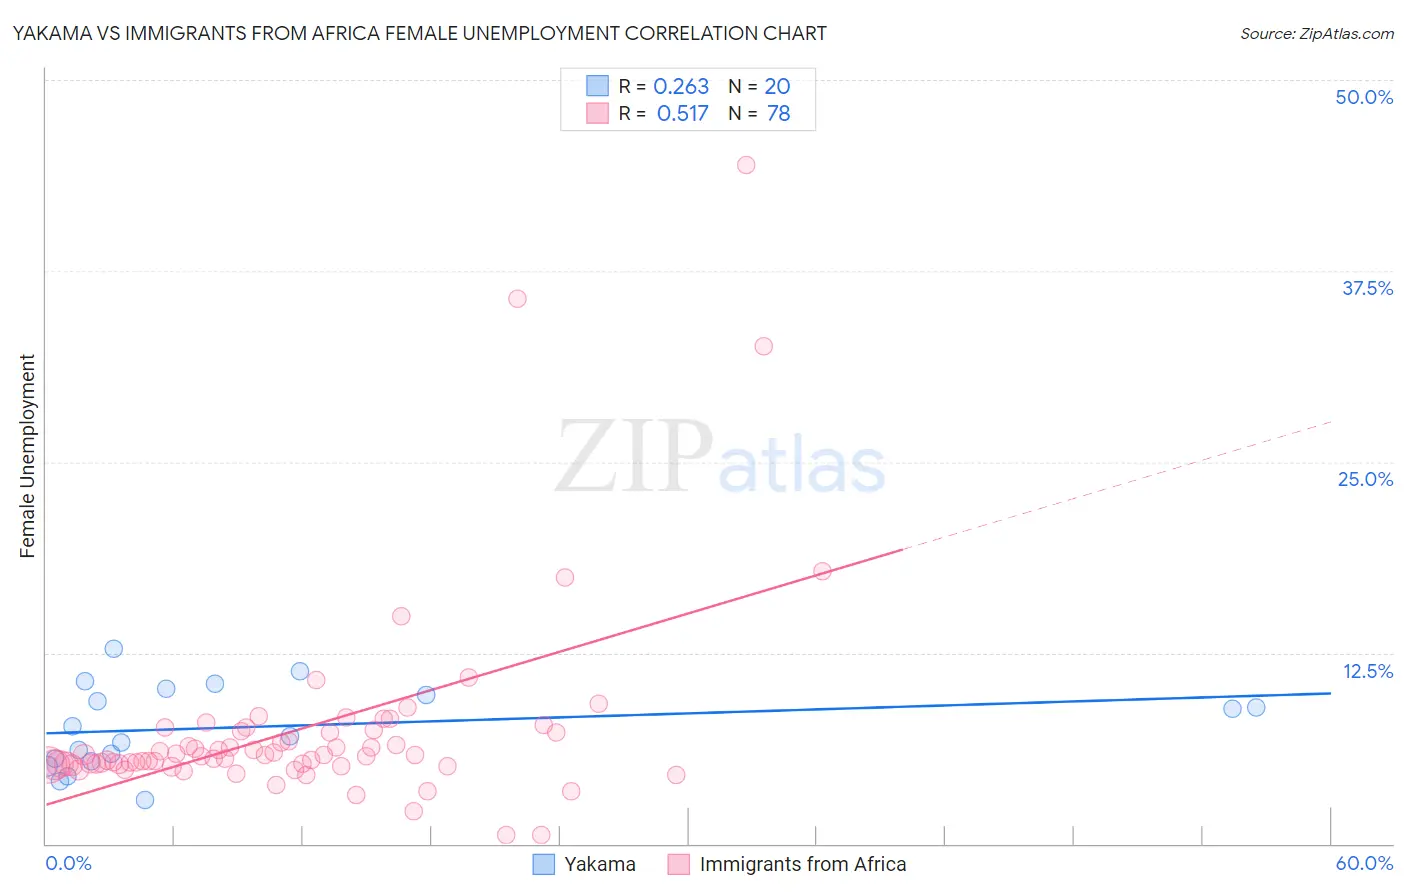 Yakama vs Immigrants from Africa Female Unemployment